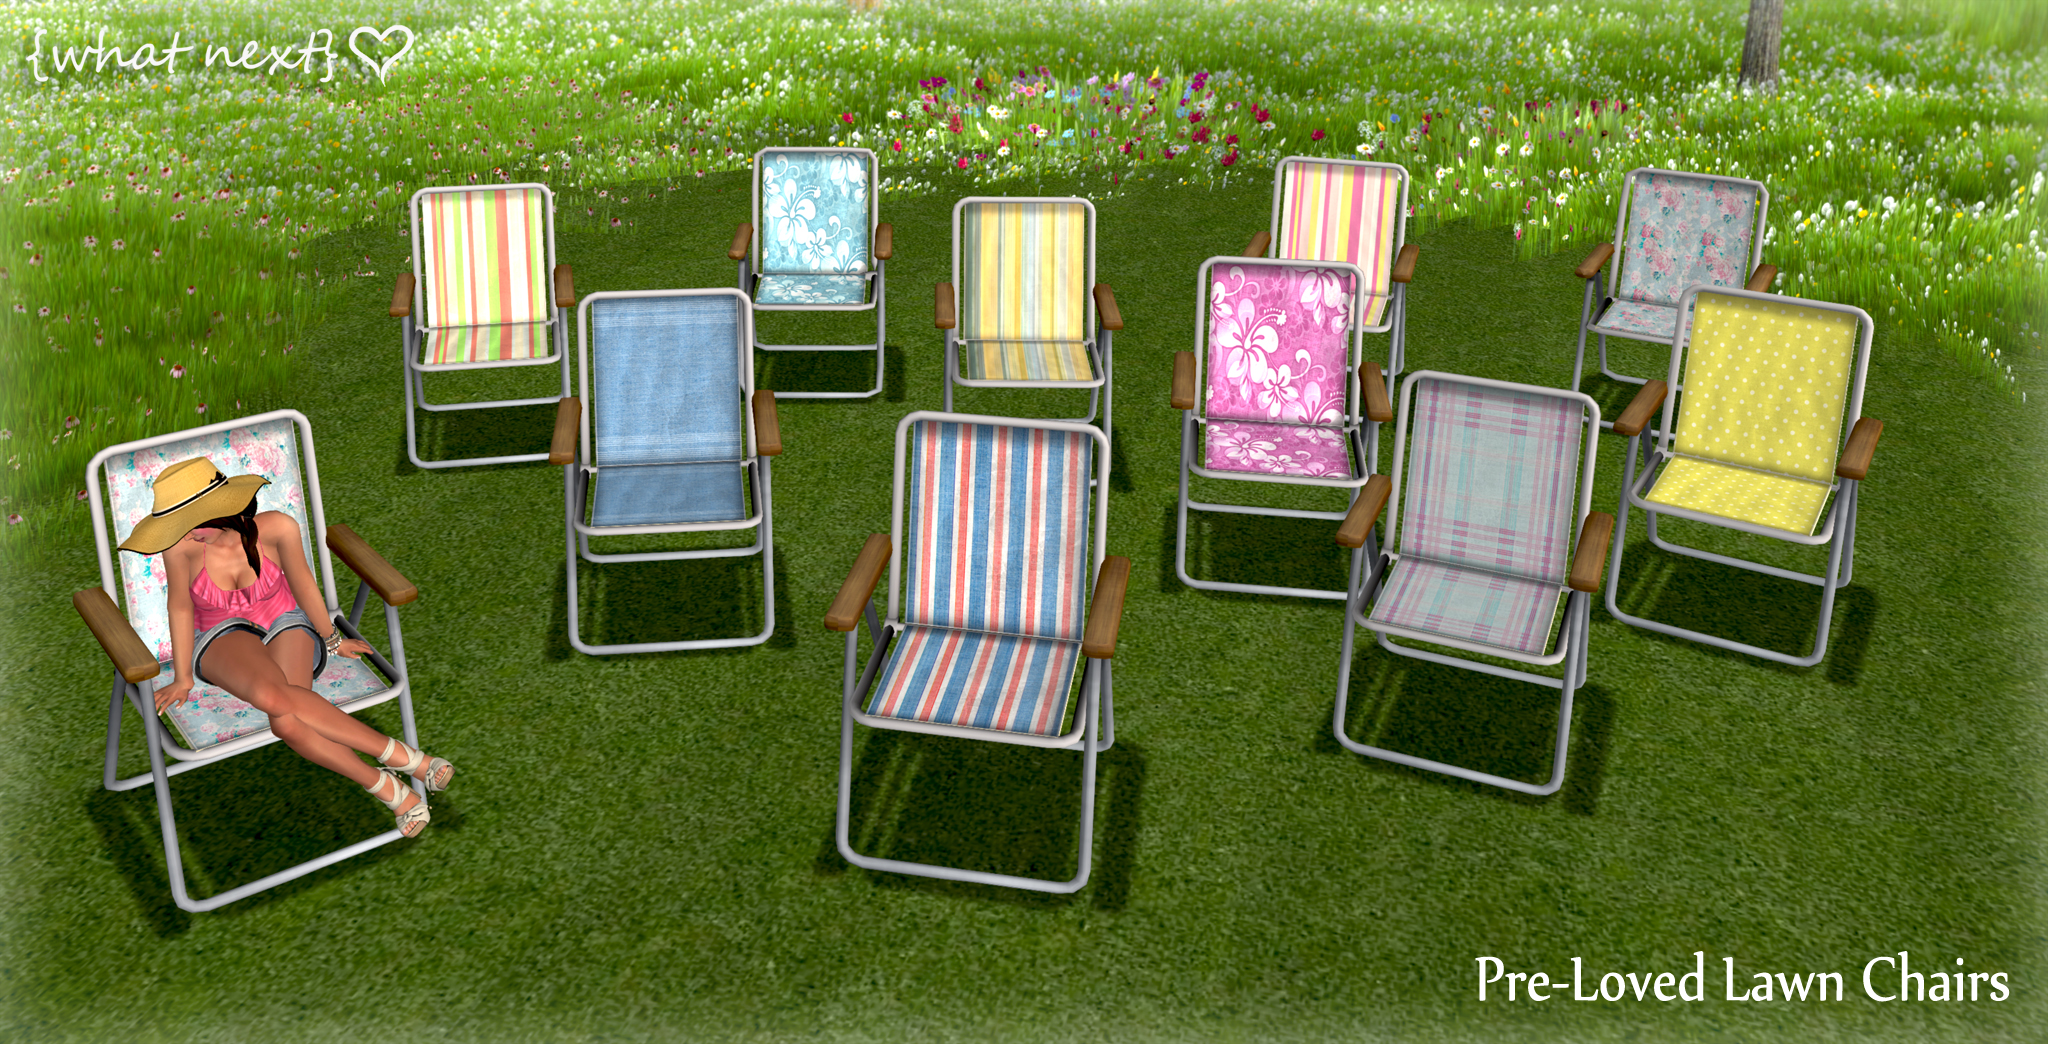 Pre-Loved Lawn Chairs for Super Bargain Saturday